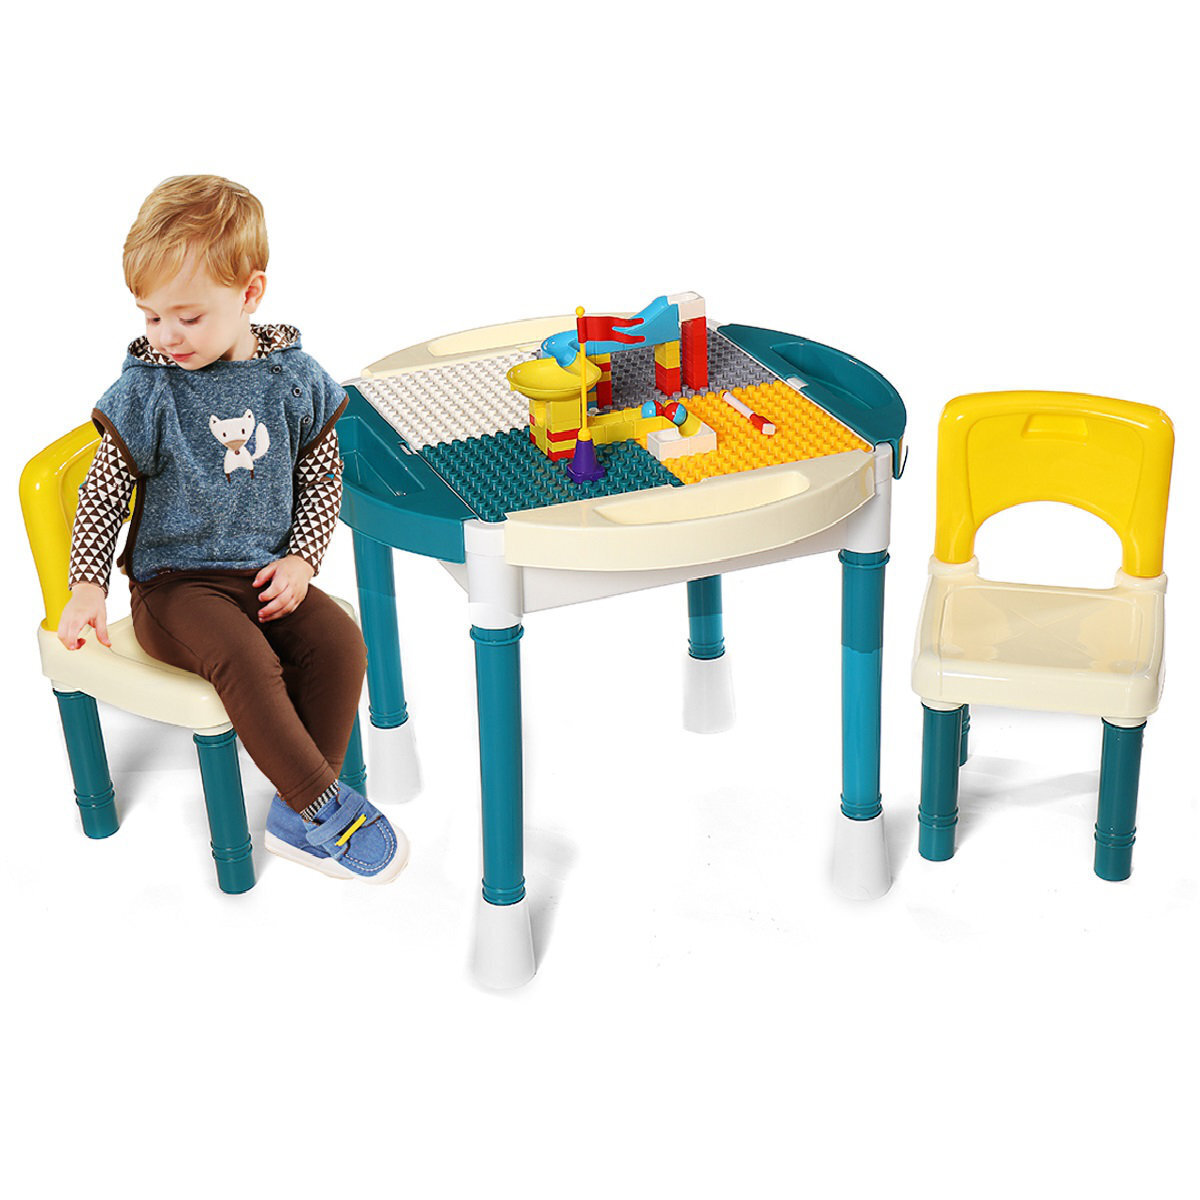 Plastic Activity Table for Toddlers